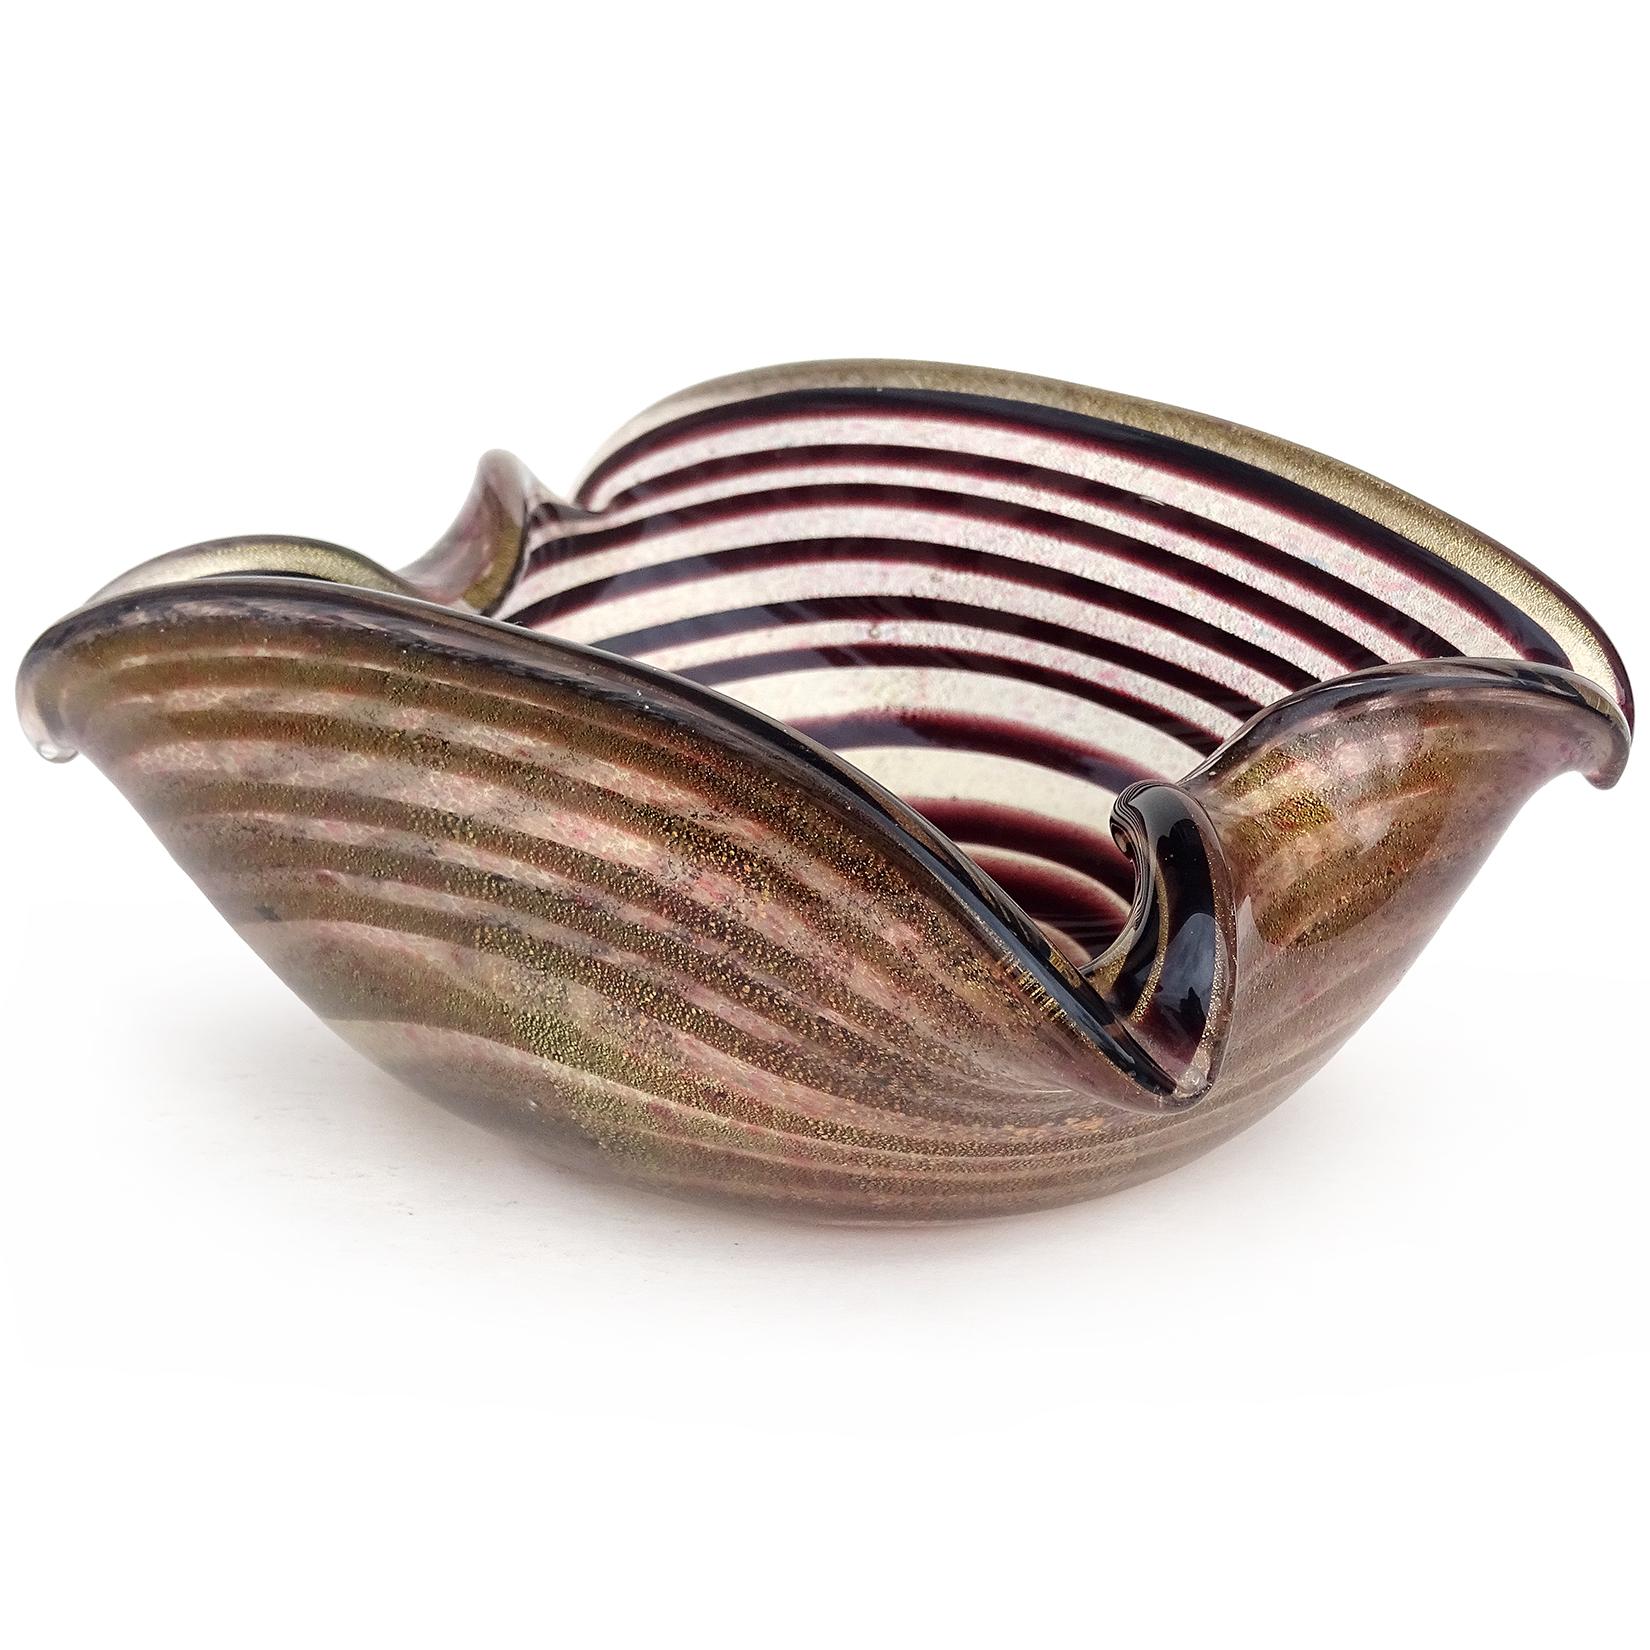 Beautiful vintage Murano hand blown dark purple optic swirl and gold flecks Italian art glass bowl. The bowl has high sides with decorative indents on the ends. The glass has tiny little color dots of blue and pink. It is also profusely covered in